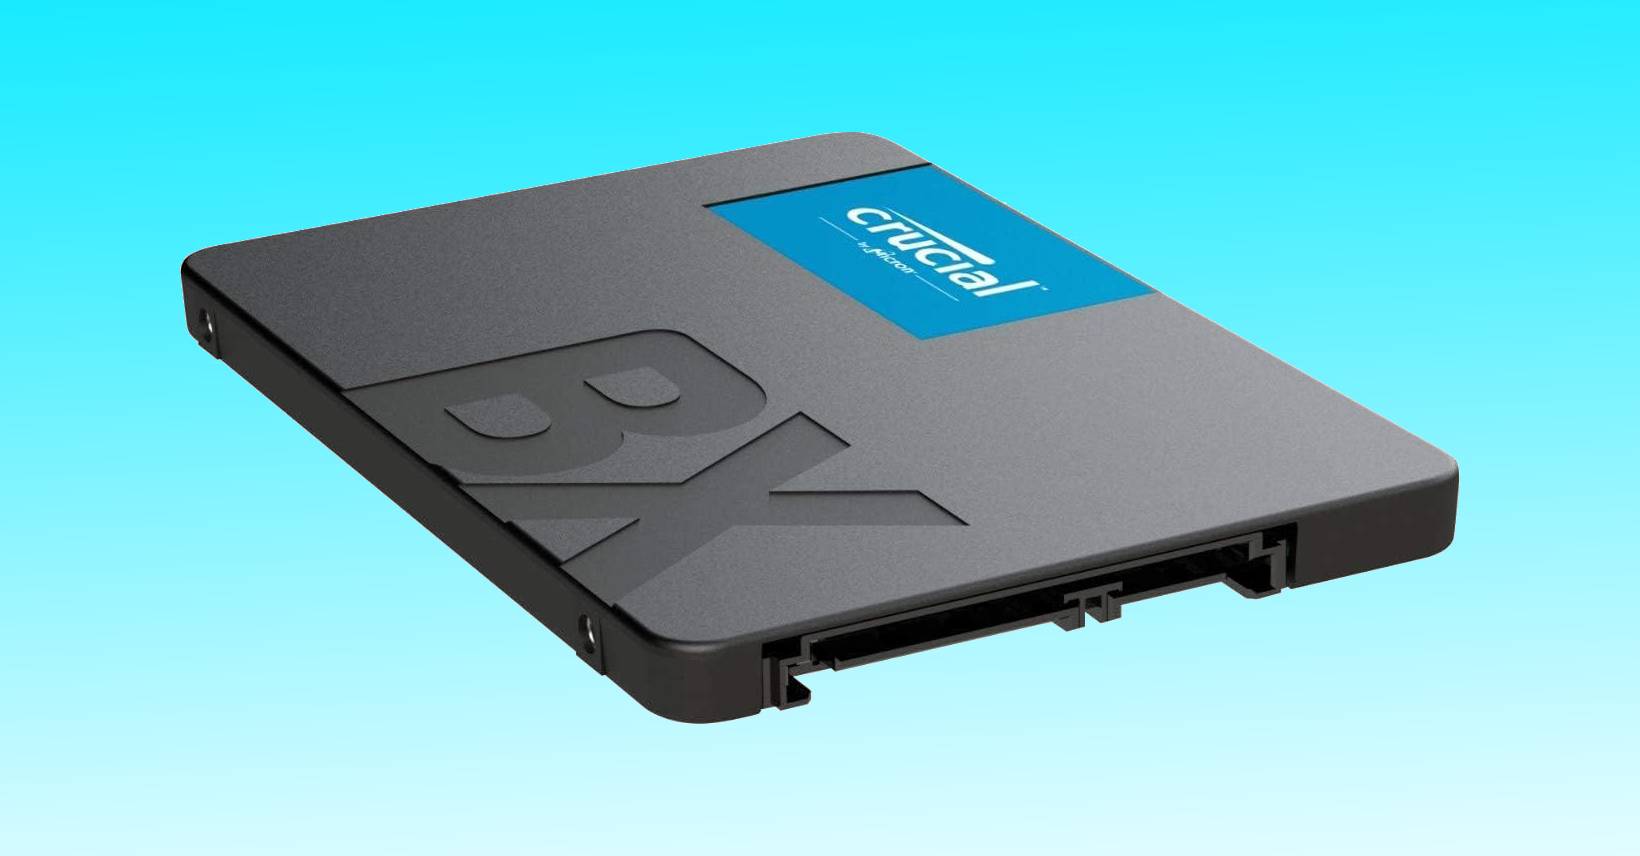 Crucial BX500 2TB SSD sees generous price cut in Amazon deal